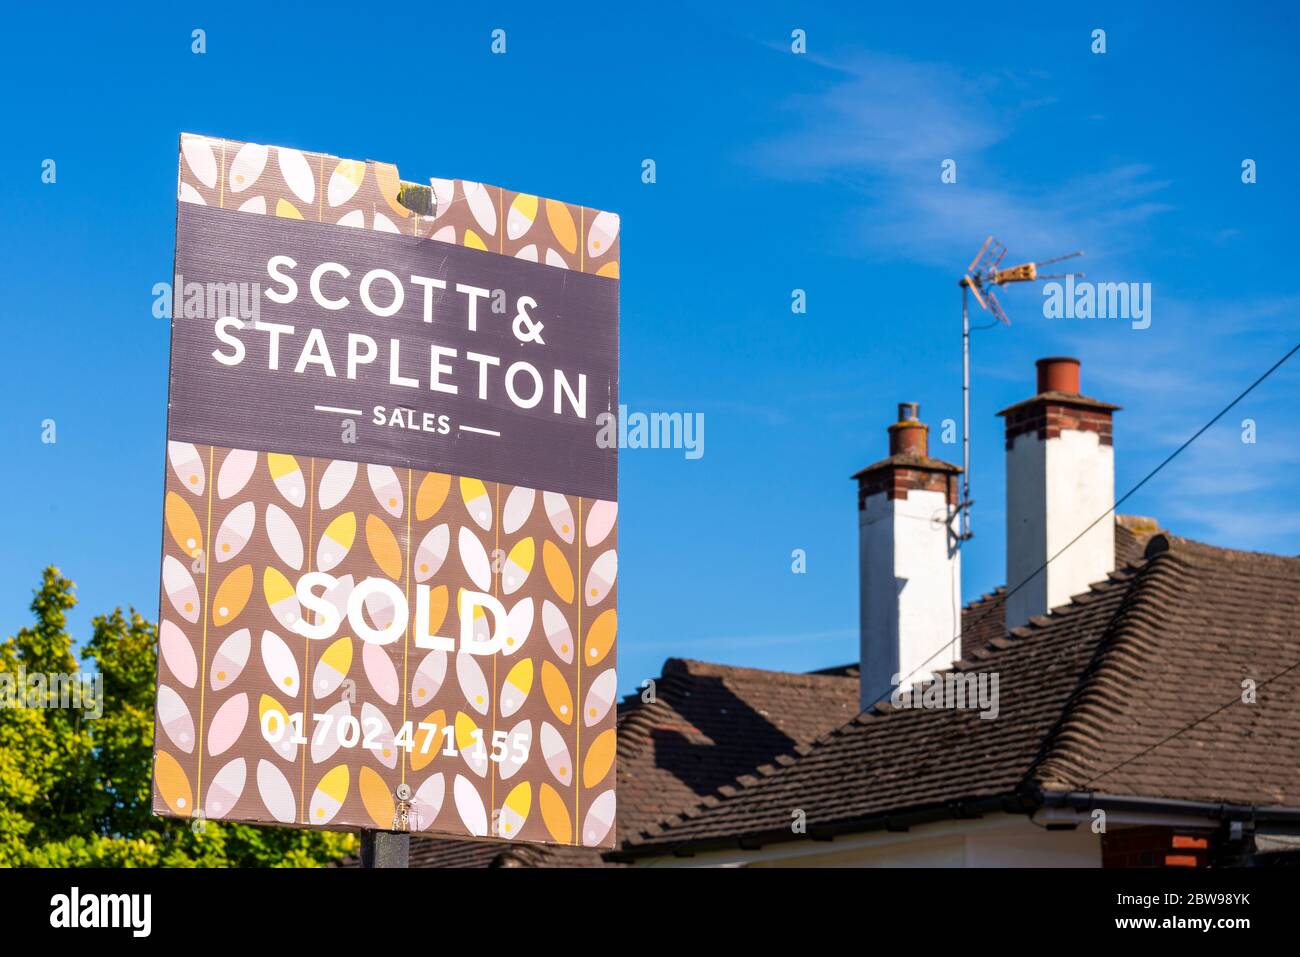 Scott & Stapleton estate agent sold sign outside property in Southend on Sea, Essex, UK. Leigh on Sea based sales and lettings agency. Space for copy Stock Photo